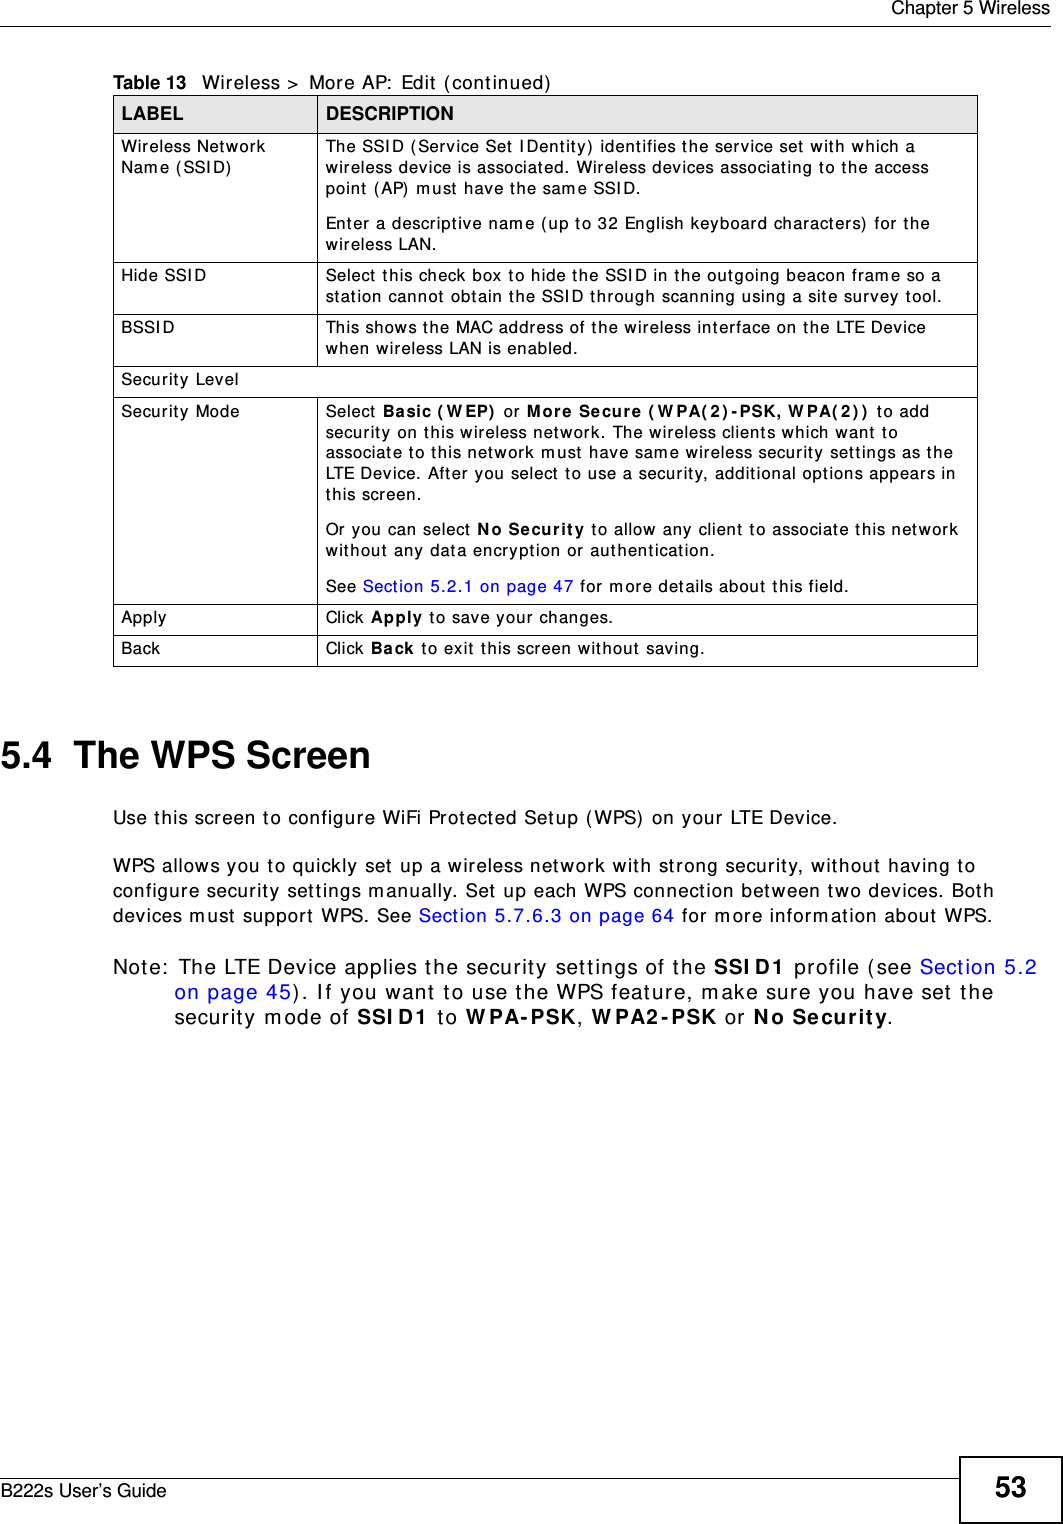  Chapter 5 WirelessB222s User’s Guide 535.4  The WPS ScreenUse t his screen to configure WiFi Prot ected Setup ( WPS)  on your LTE Device.WPS allows you t o quickly set  up a wireless network with st rong securit y, wit hout having to configure securit y sett ings m anually. Set  up each WPS connect ion bet ween two devices. Both devices m ust  support  WPS. See Section 5.7.6.3 on page 64 for m ore inform ation about WPS.Not e:  The LTE Device applies the securit y set tings of t he SSI D1  profile (see Sect ion 5.2 on page 45) . I f you want  t o use t he WPS feat ure, m ake sure you have set t he securit y m ode of SSI D1  t o W PA- PSK, W PA2 - PSK or N o Securit y.Wireless Net work Nam e ( SSI D)The SSI D ( Service Set  I Dentit y)  identifies the service set wit h w hich a wireless device is associat ed. Wireless devices associat ing t o t he access point  ( AP)  m ust have t he sam e SSI D. Enter a descript ive nam e (up t o 32 English keyboard charact ers) for t he wireless LAN. Hide SSI D Select  this check box  t o hide t he SSI D in t he out going beacon fram e so a st at ion cannot  obt ain the SSI D t hrough scanning using a site survey t ool.BSSI D This shows t he MAC address of the wireless interface on t he LTE Device when wireless LAN is enabled.Securit y LevelSecurit y Mode Select  Ba sic ( W EP)  or More  Se cu re  ( W PA( 2 ) - PSK, W PA( 2 ) )  t o add securit y on t his wireless netw ork. The wireless client s w hich want  t o associat e t o t his net work m ust have sam e w ireless security set t ings as t he LTE Dev ice. Aft er you select  to use a security, addit ional opt ions appears in t his screen. Or you can select N o Secur it y t o allow any client  to associat e this net work wit hout  any dat a encrypt ion or aut henticat ion.See Sect ion 5.2.1 on page 47 for m ore det ails about  t his field.Apply Click Apply t o save your changes.Back Click Back  t o exit  this screen wit hout saving.Table 13   Wireless &gt;  More AP:  Edit  ( cont inued)LABEL DESCRIPTION